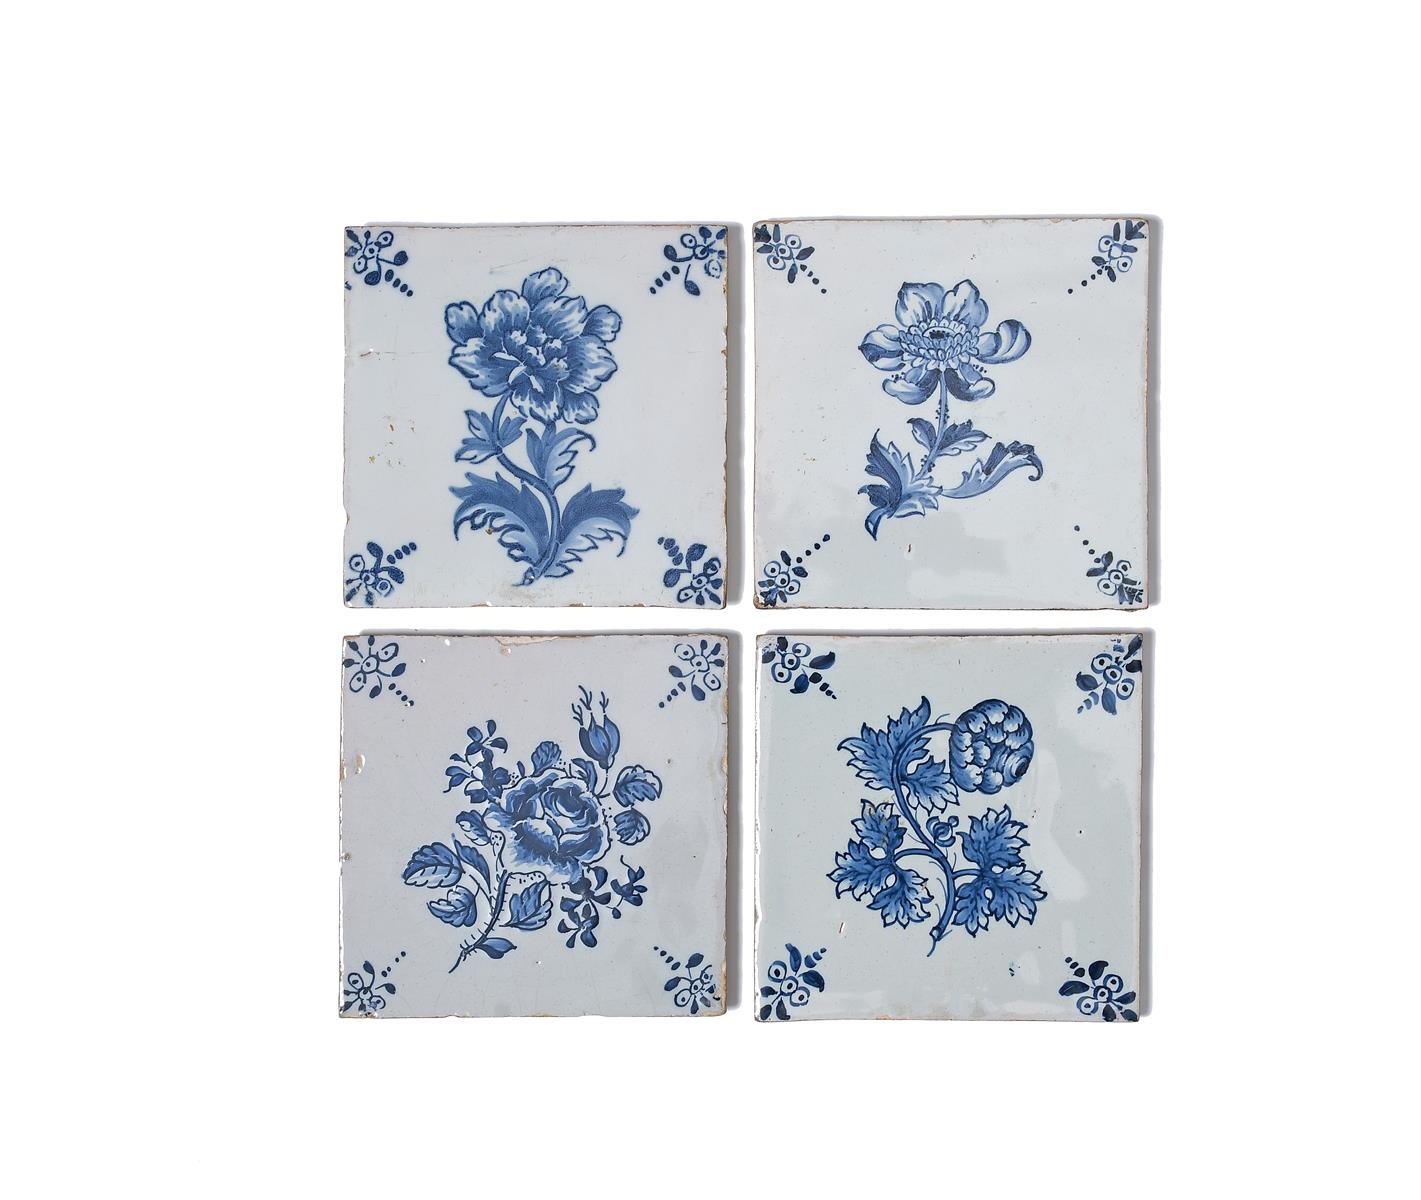 Four Lambeth delftware botanical tiles, c.1760-80, finely painted in blue, each with a single flower